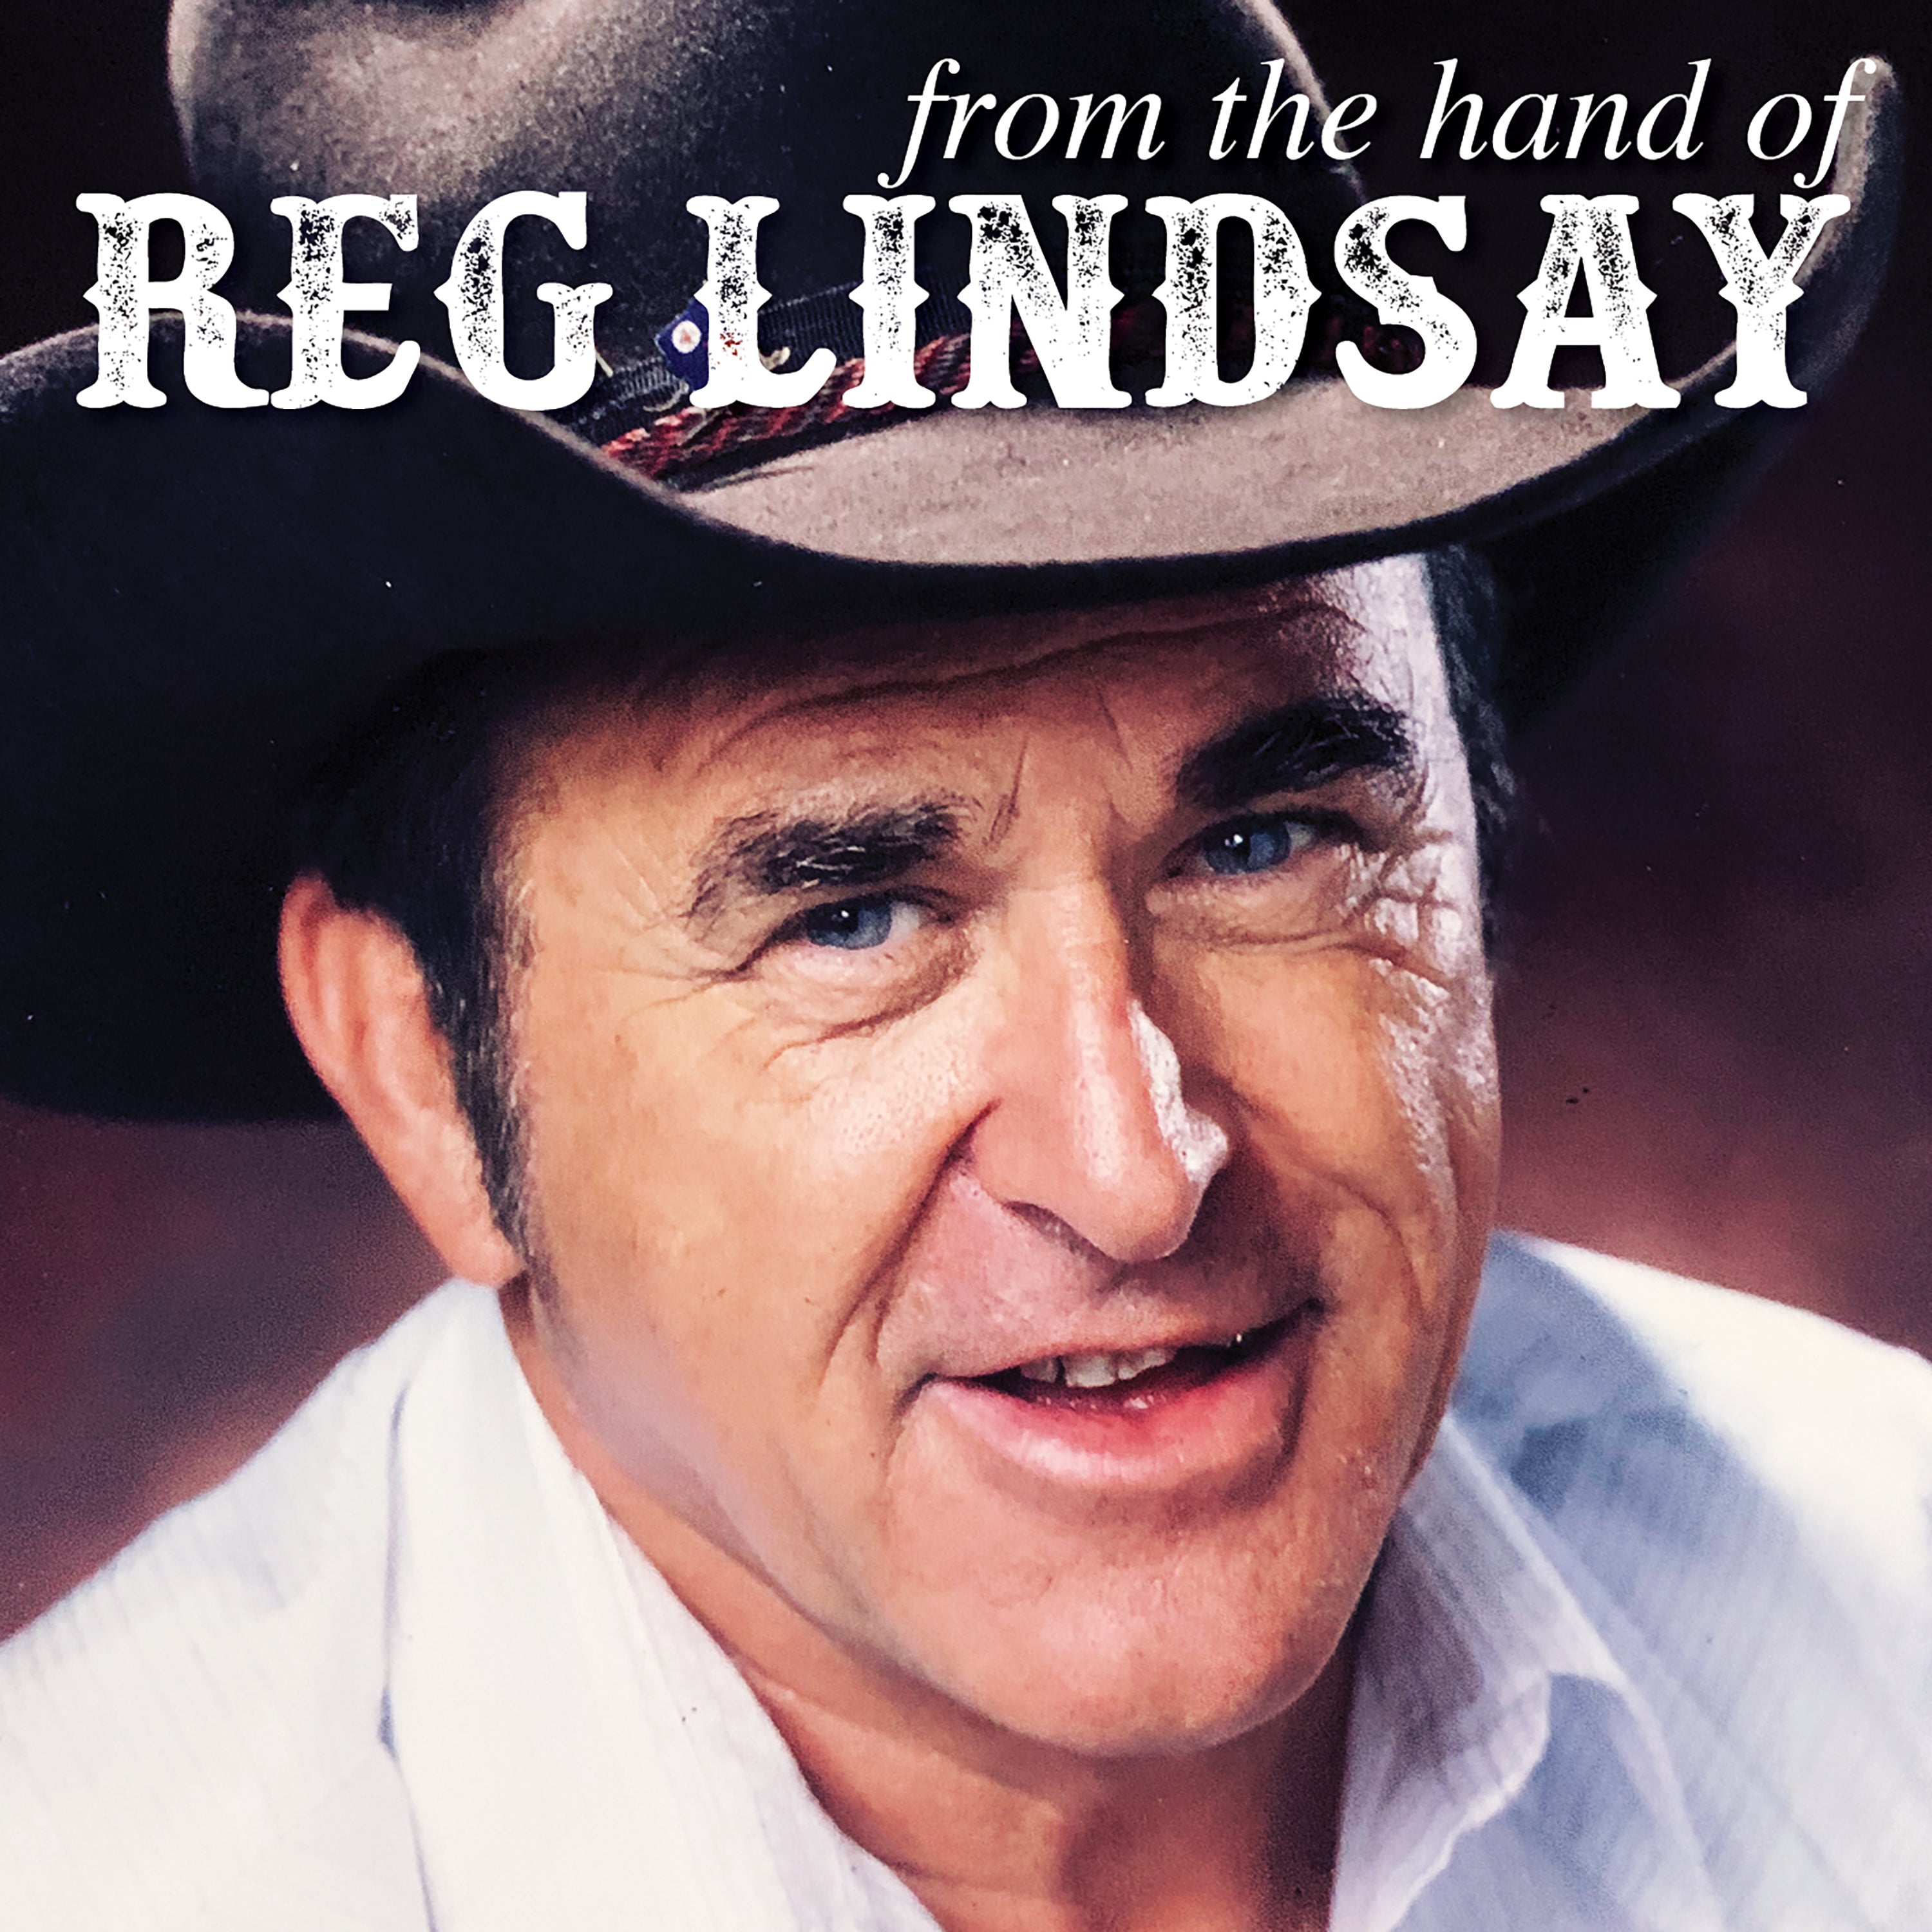 REG LINDSAY - FROM THE HAND OF